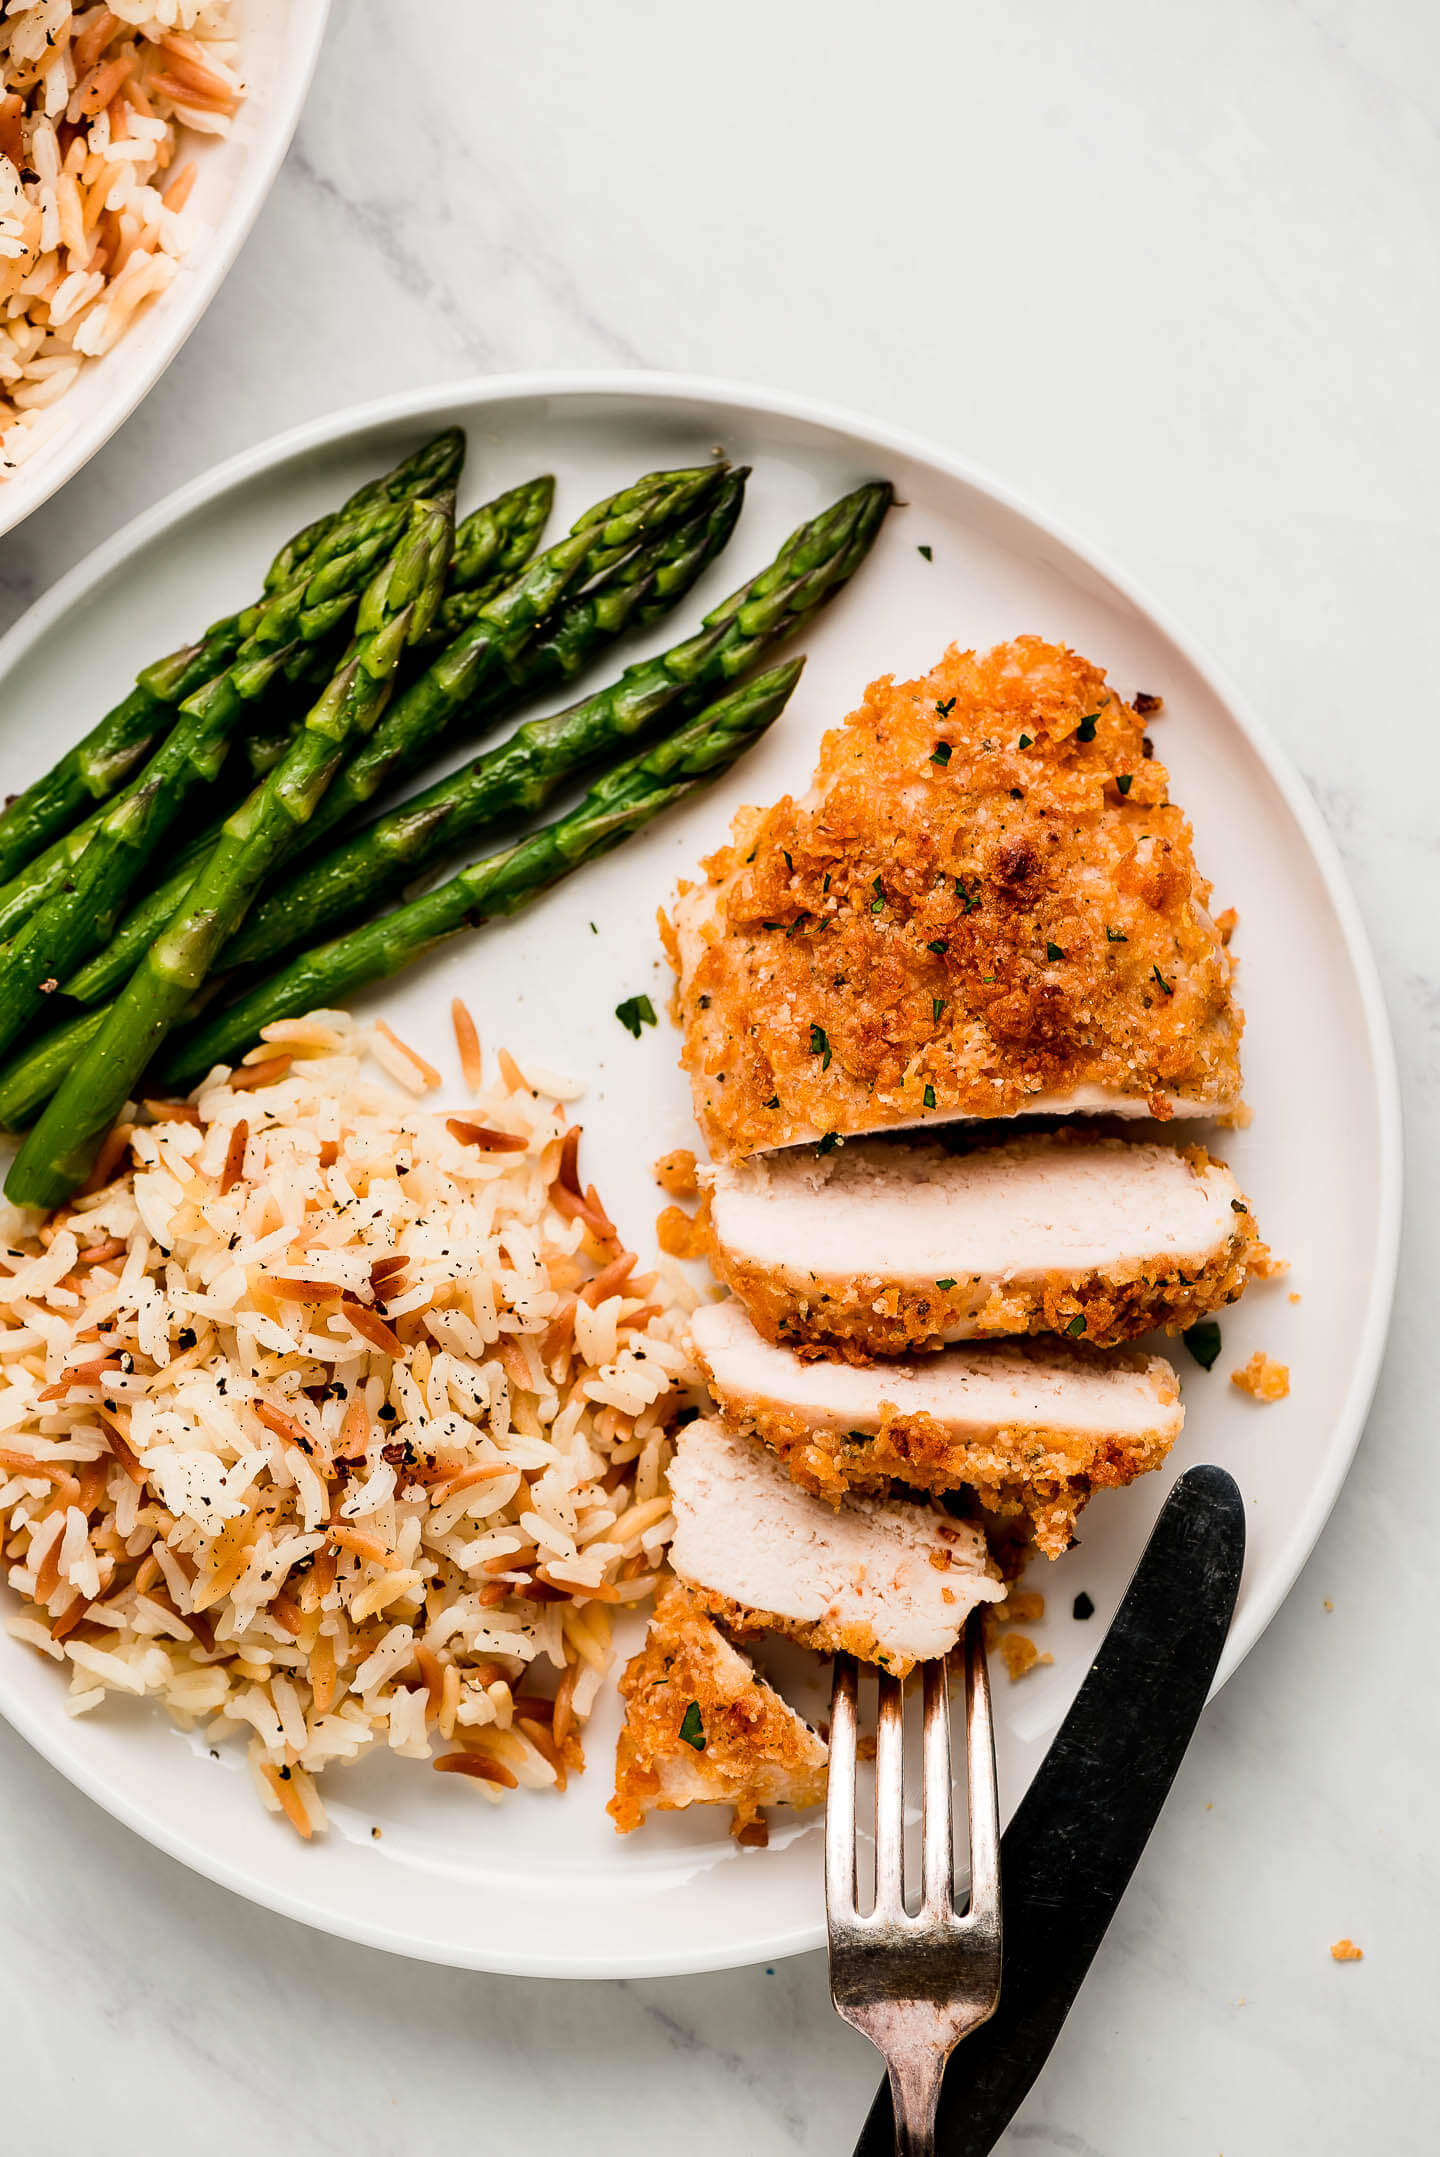 A plate of sliced Ranch Chicken, asparagus, and orzo rice.